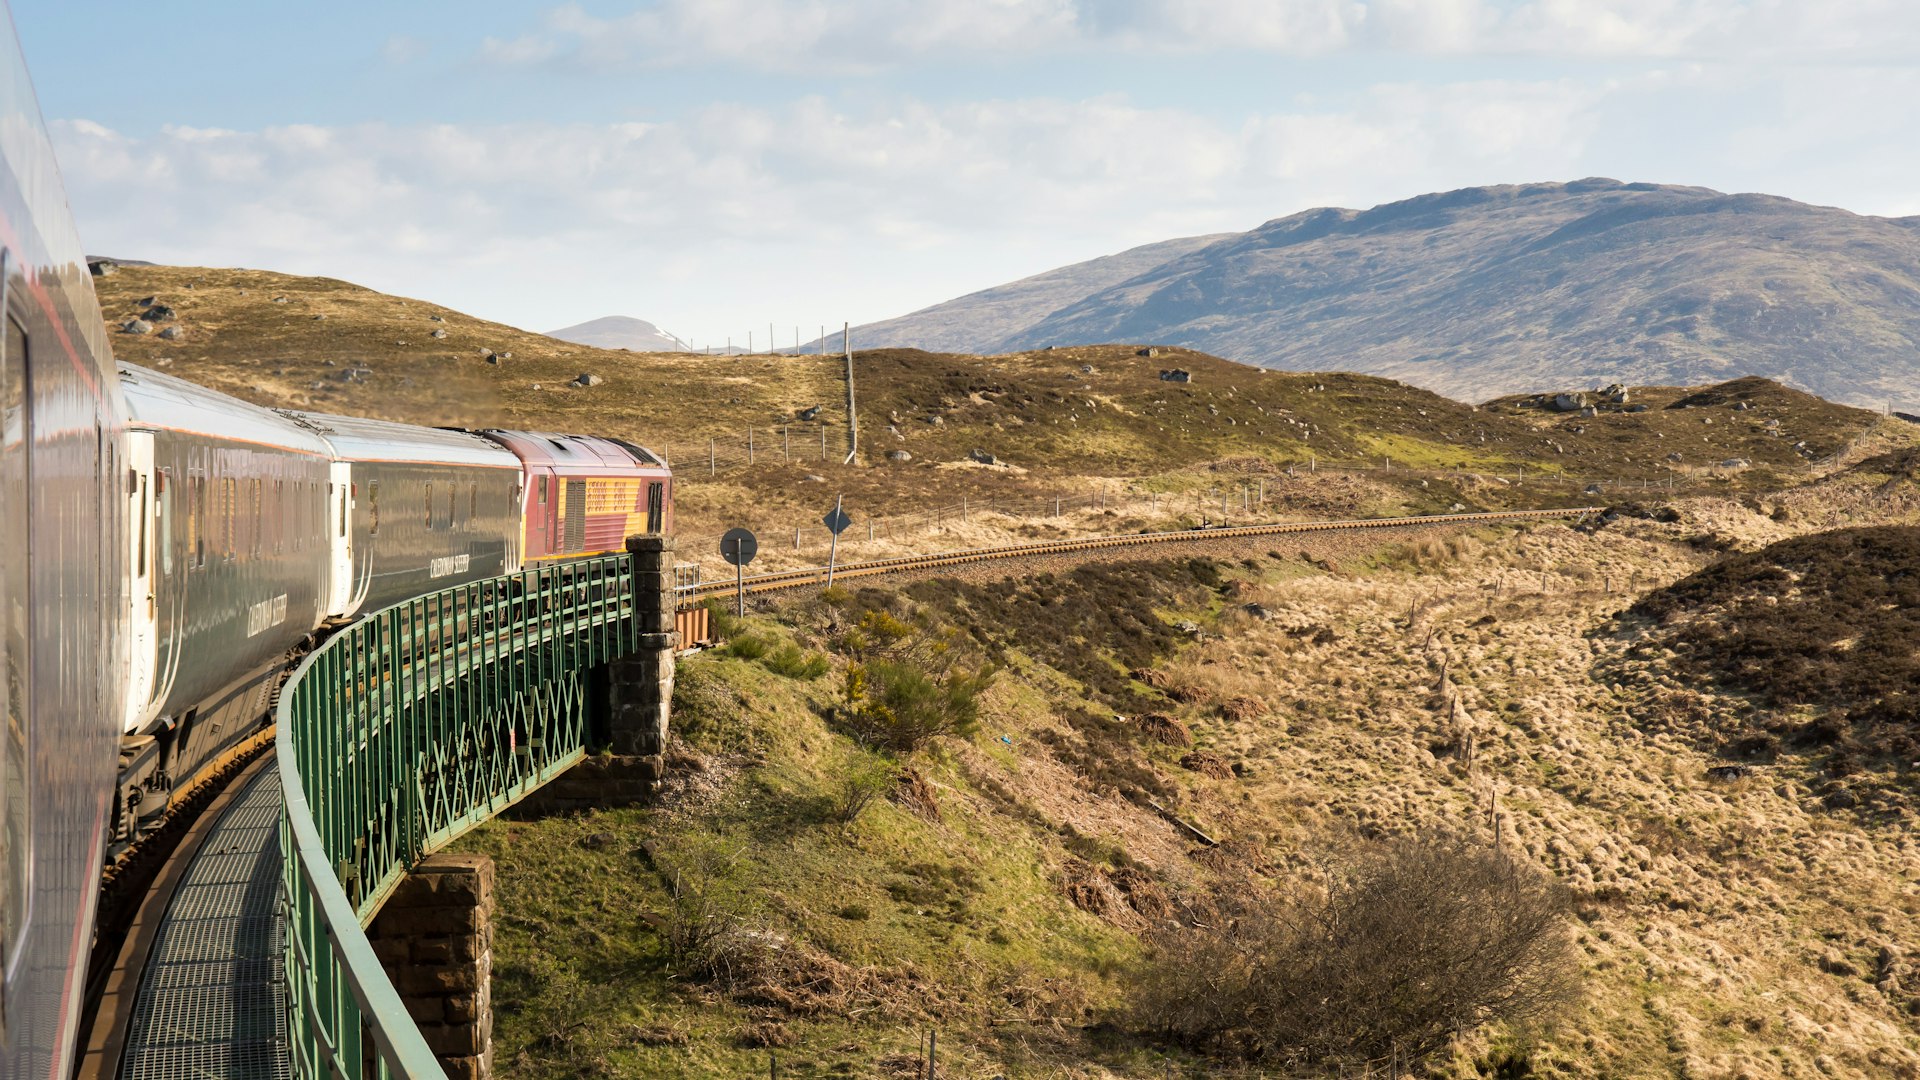 The Caledonian Sleeper train crosses Rannoch Viaduct on the scenic West Highland Line railway in the Scottish Highlands.